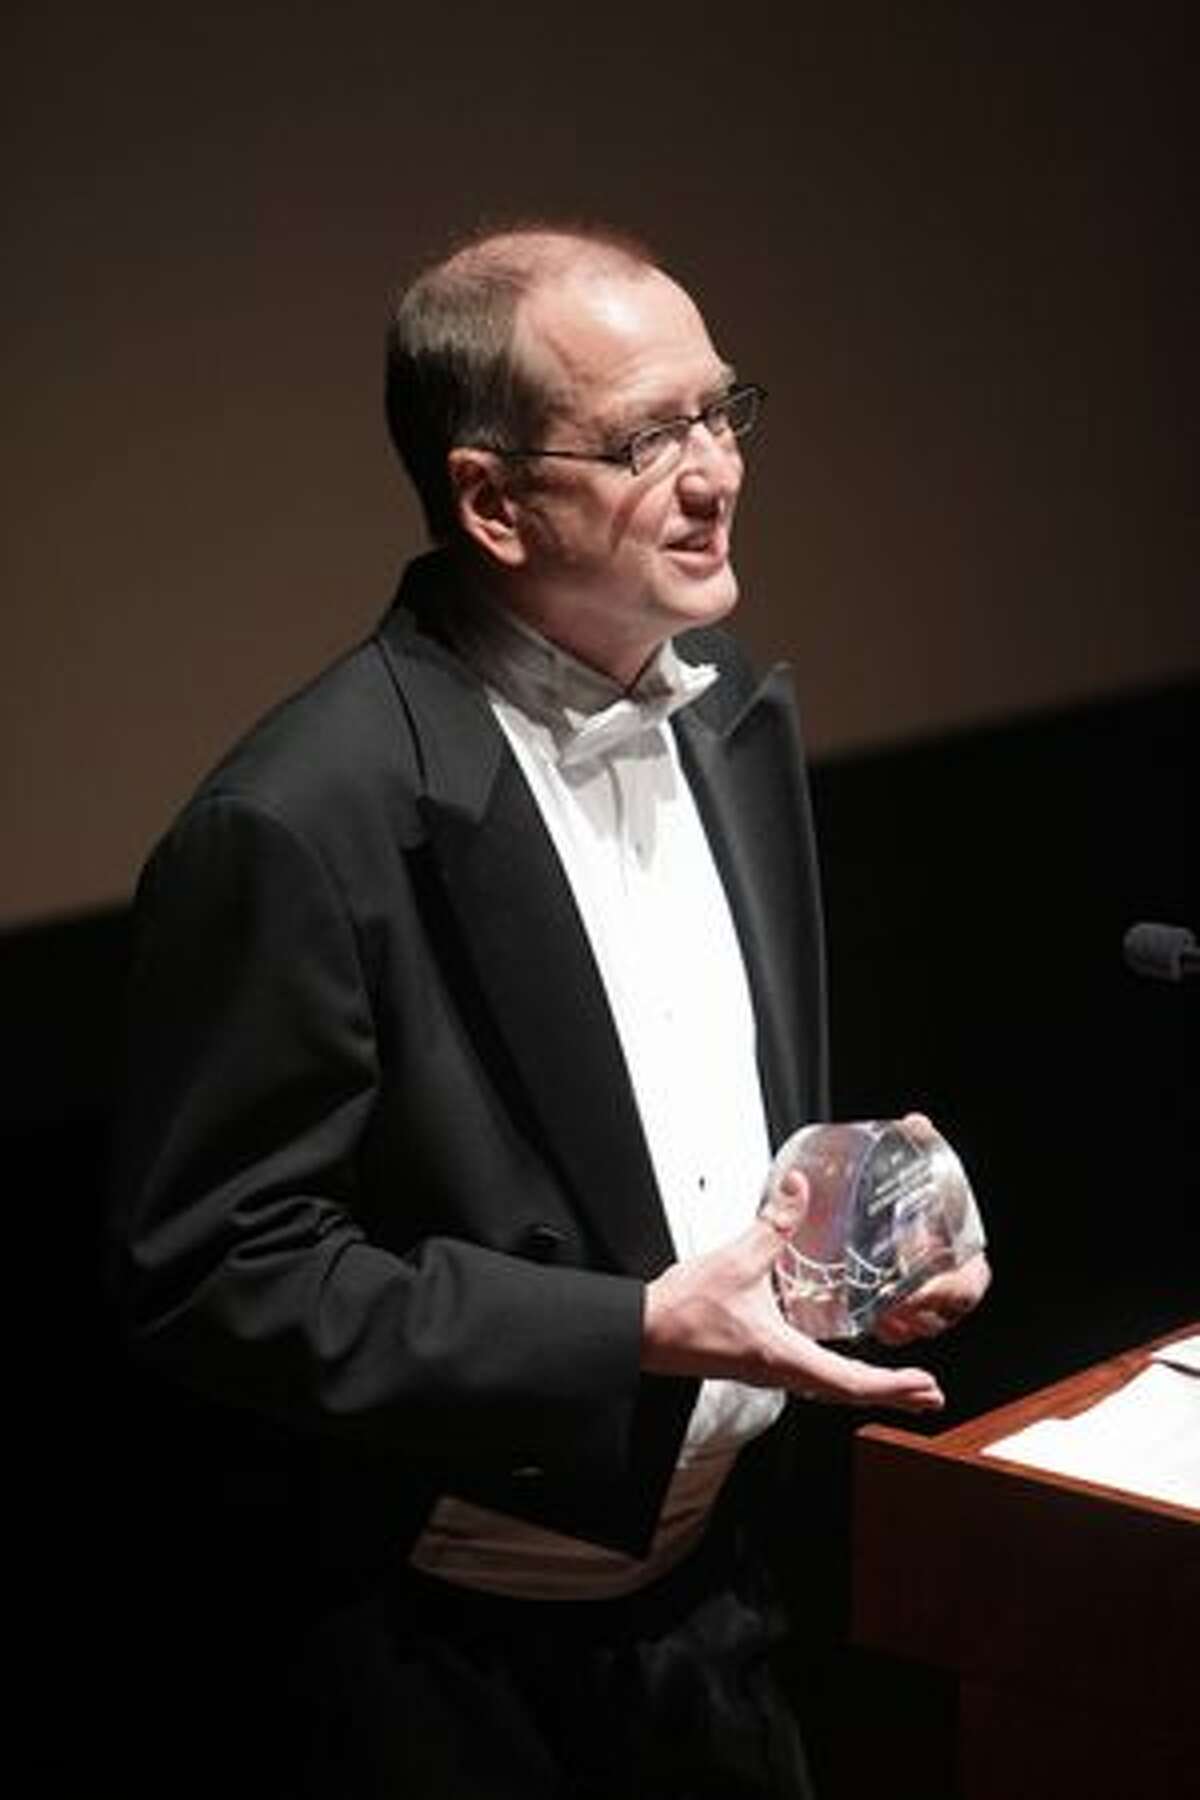 Musician David Sabee of Seattle, who's had a hand in the musical scores of dozens of films, accepts the Mayor's Award.